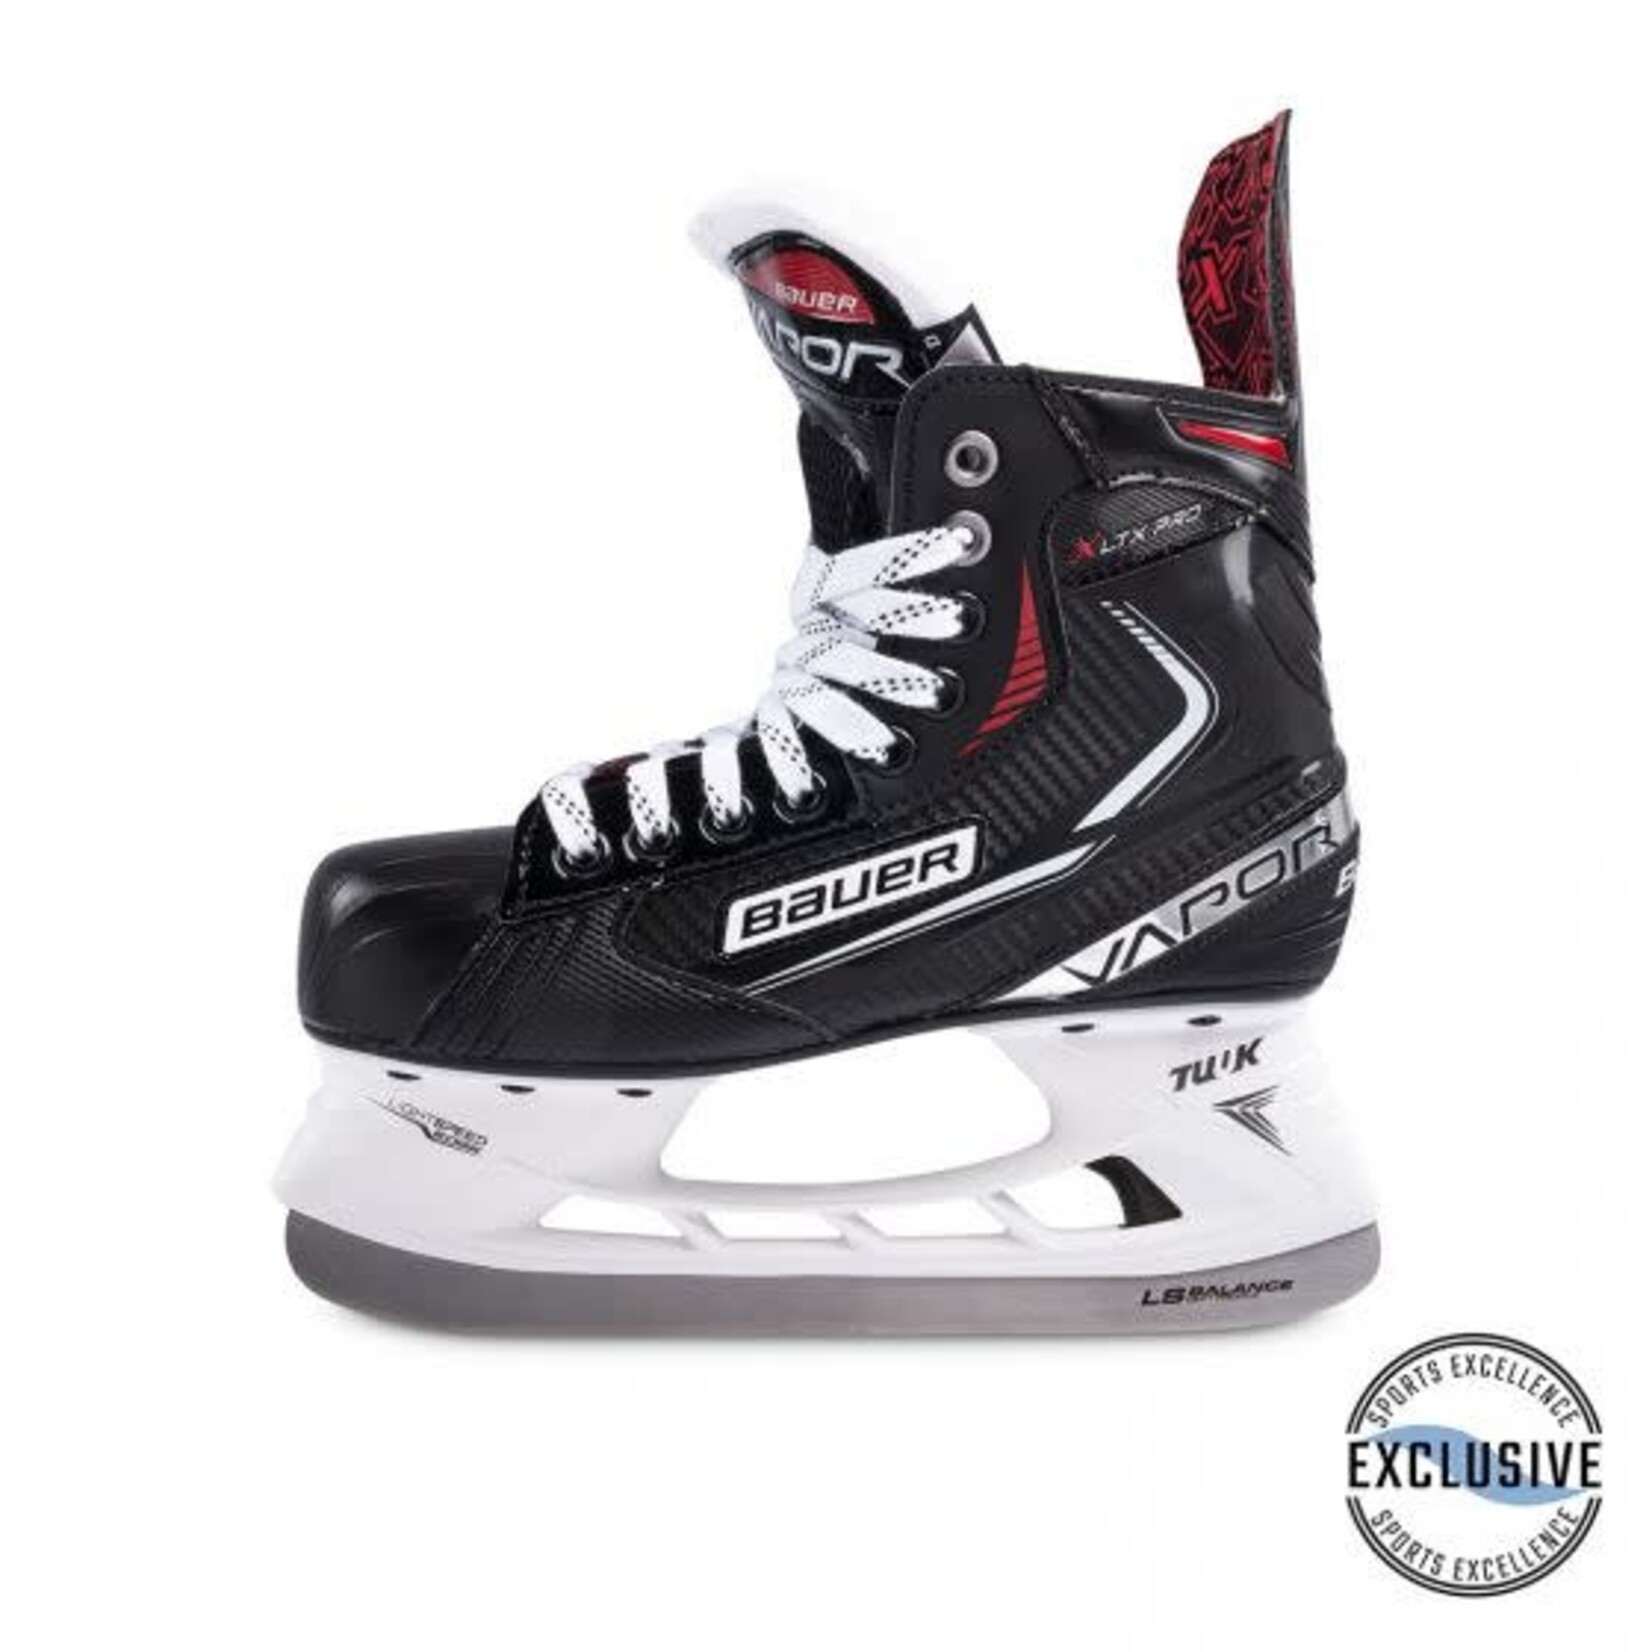 Bauer Hockey Skates, Vapor XLTX Pro, Junior - Time-Out Sports Excellence